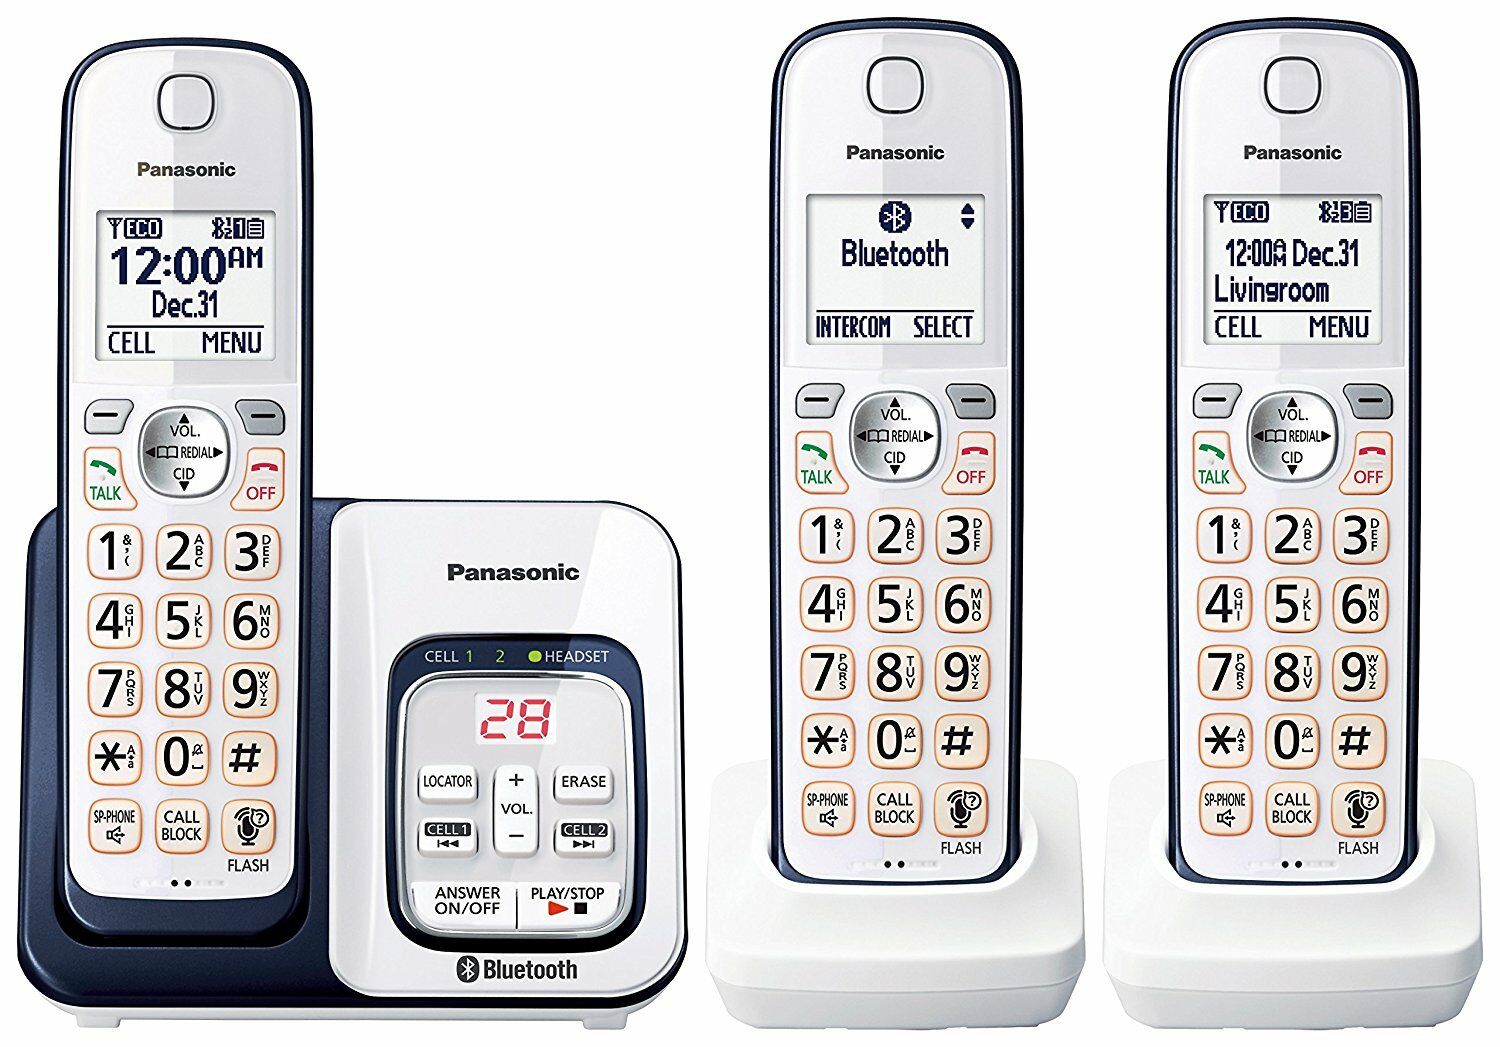 Panasonic Kx-tgd563a Bluetooth Cordless Phone With Voice Assist - 3 Handsets